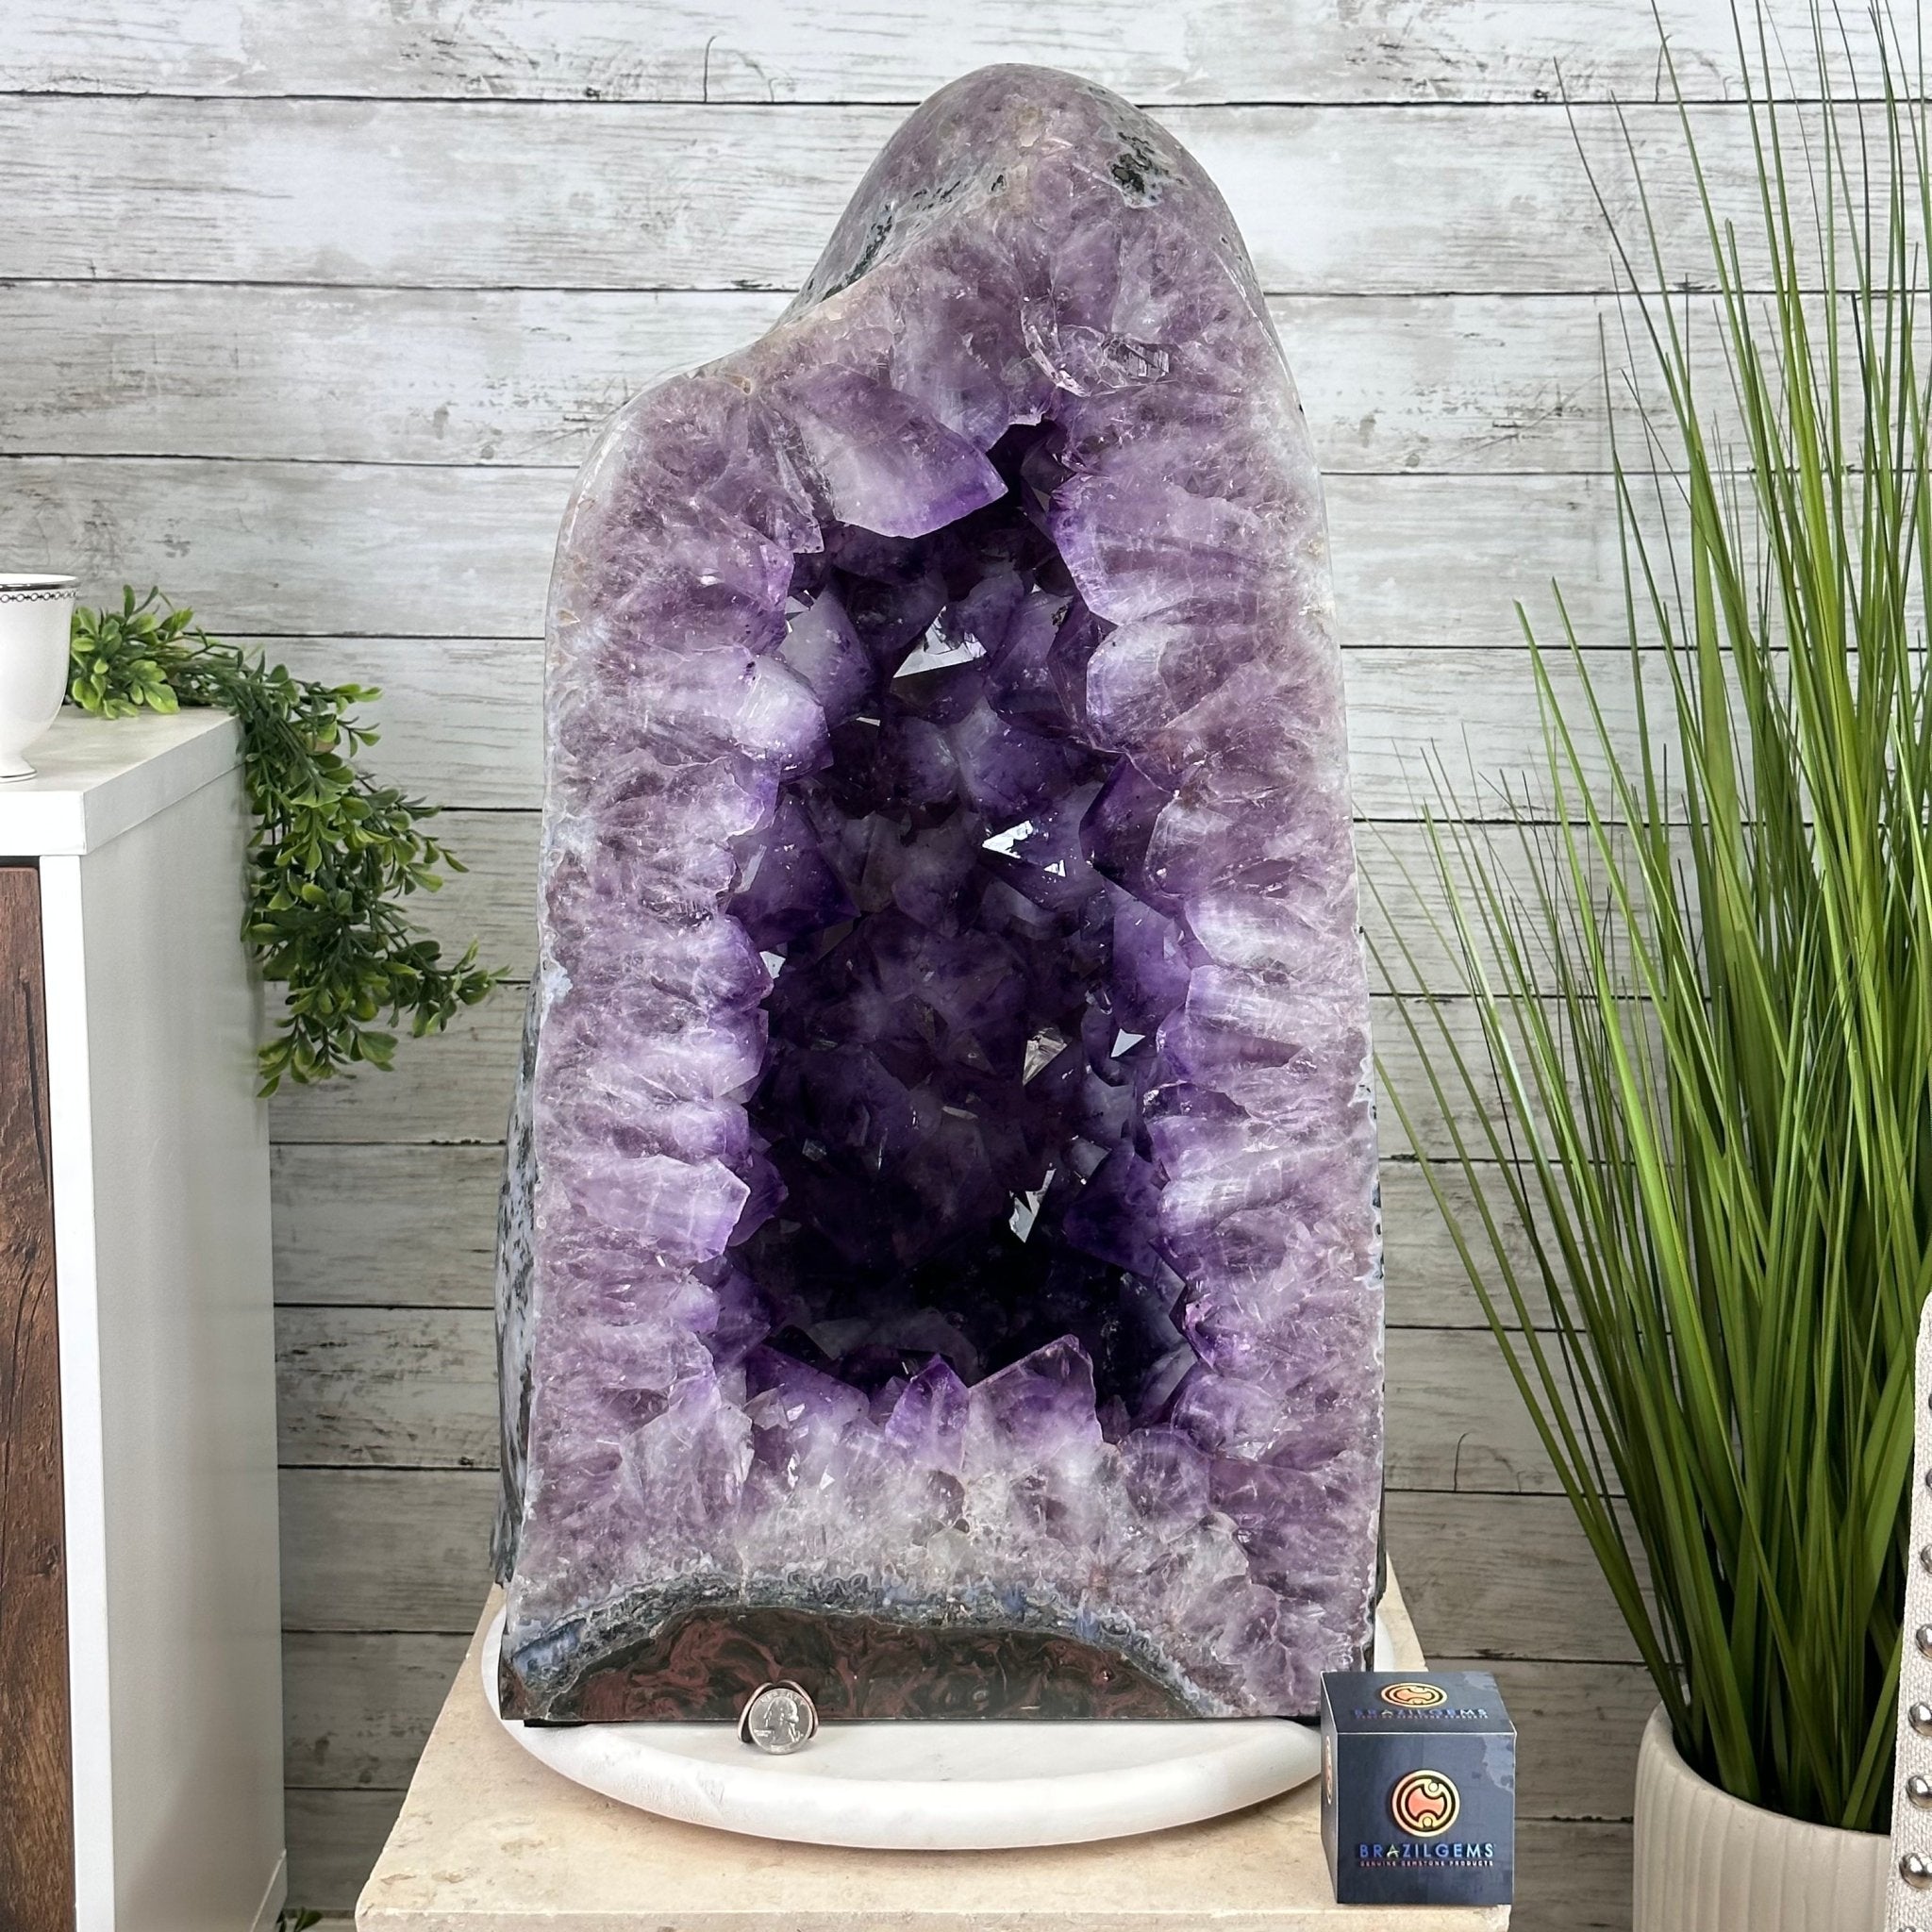 Extra Plus Quality Polished Brazilian Amethyst Cathedral, 161.3 lbs & 24.75" tall Model #5602-0047 by Brazil Gems - Brazil GemsBrazil GemsExtra Plus Quality Polished Brazilian Amethyst Cathedral, 161.3 lbs & 24.75" tall Model #5602-0047 by Brazil GemsPolished Cathedrals5602-0047